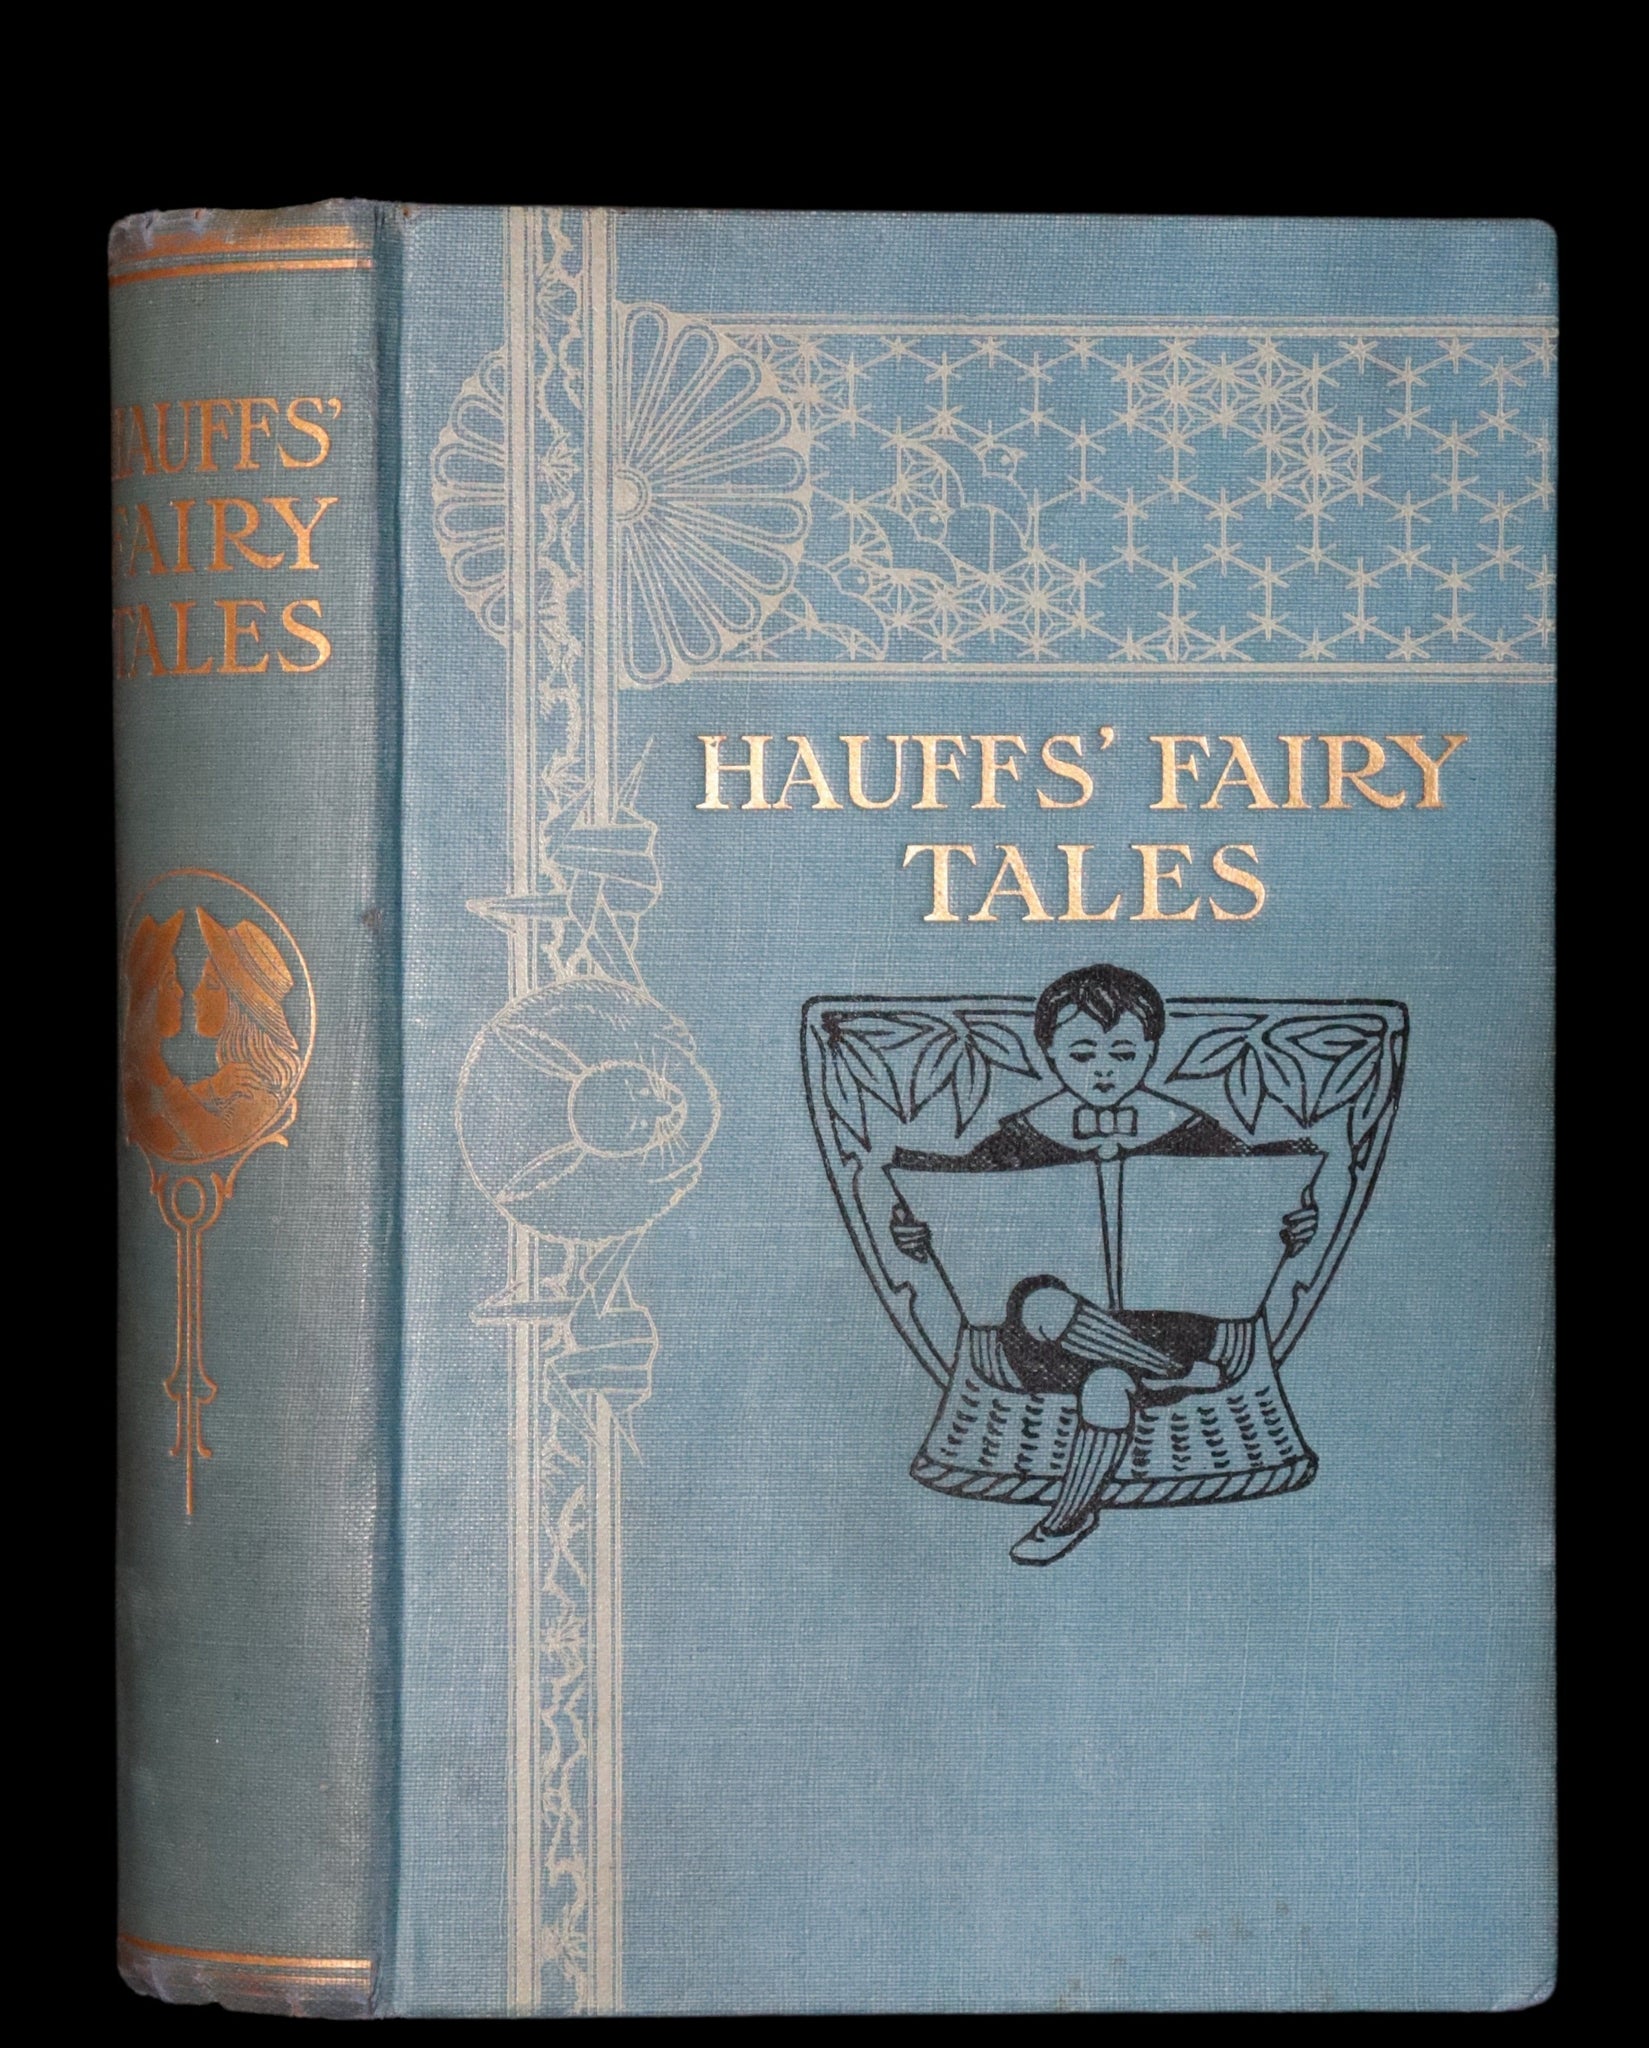 1905 Scarce First Edition illustrated by Dorothy Morris. - HAUFF'S Fairy Tales.